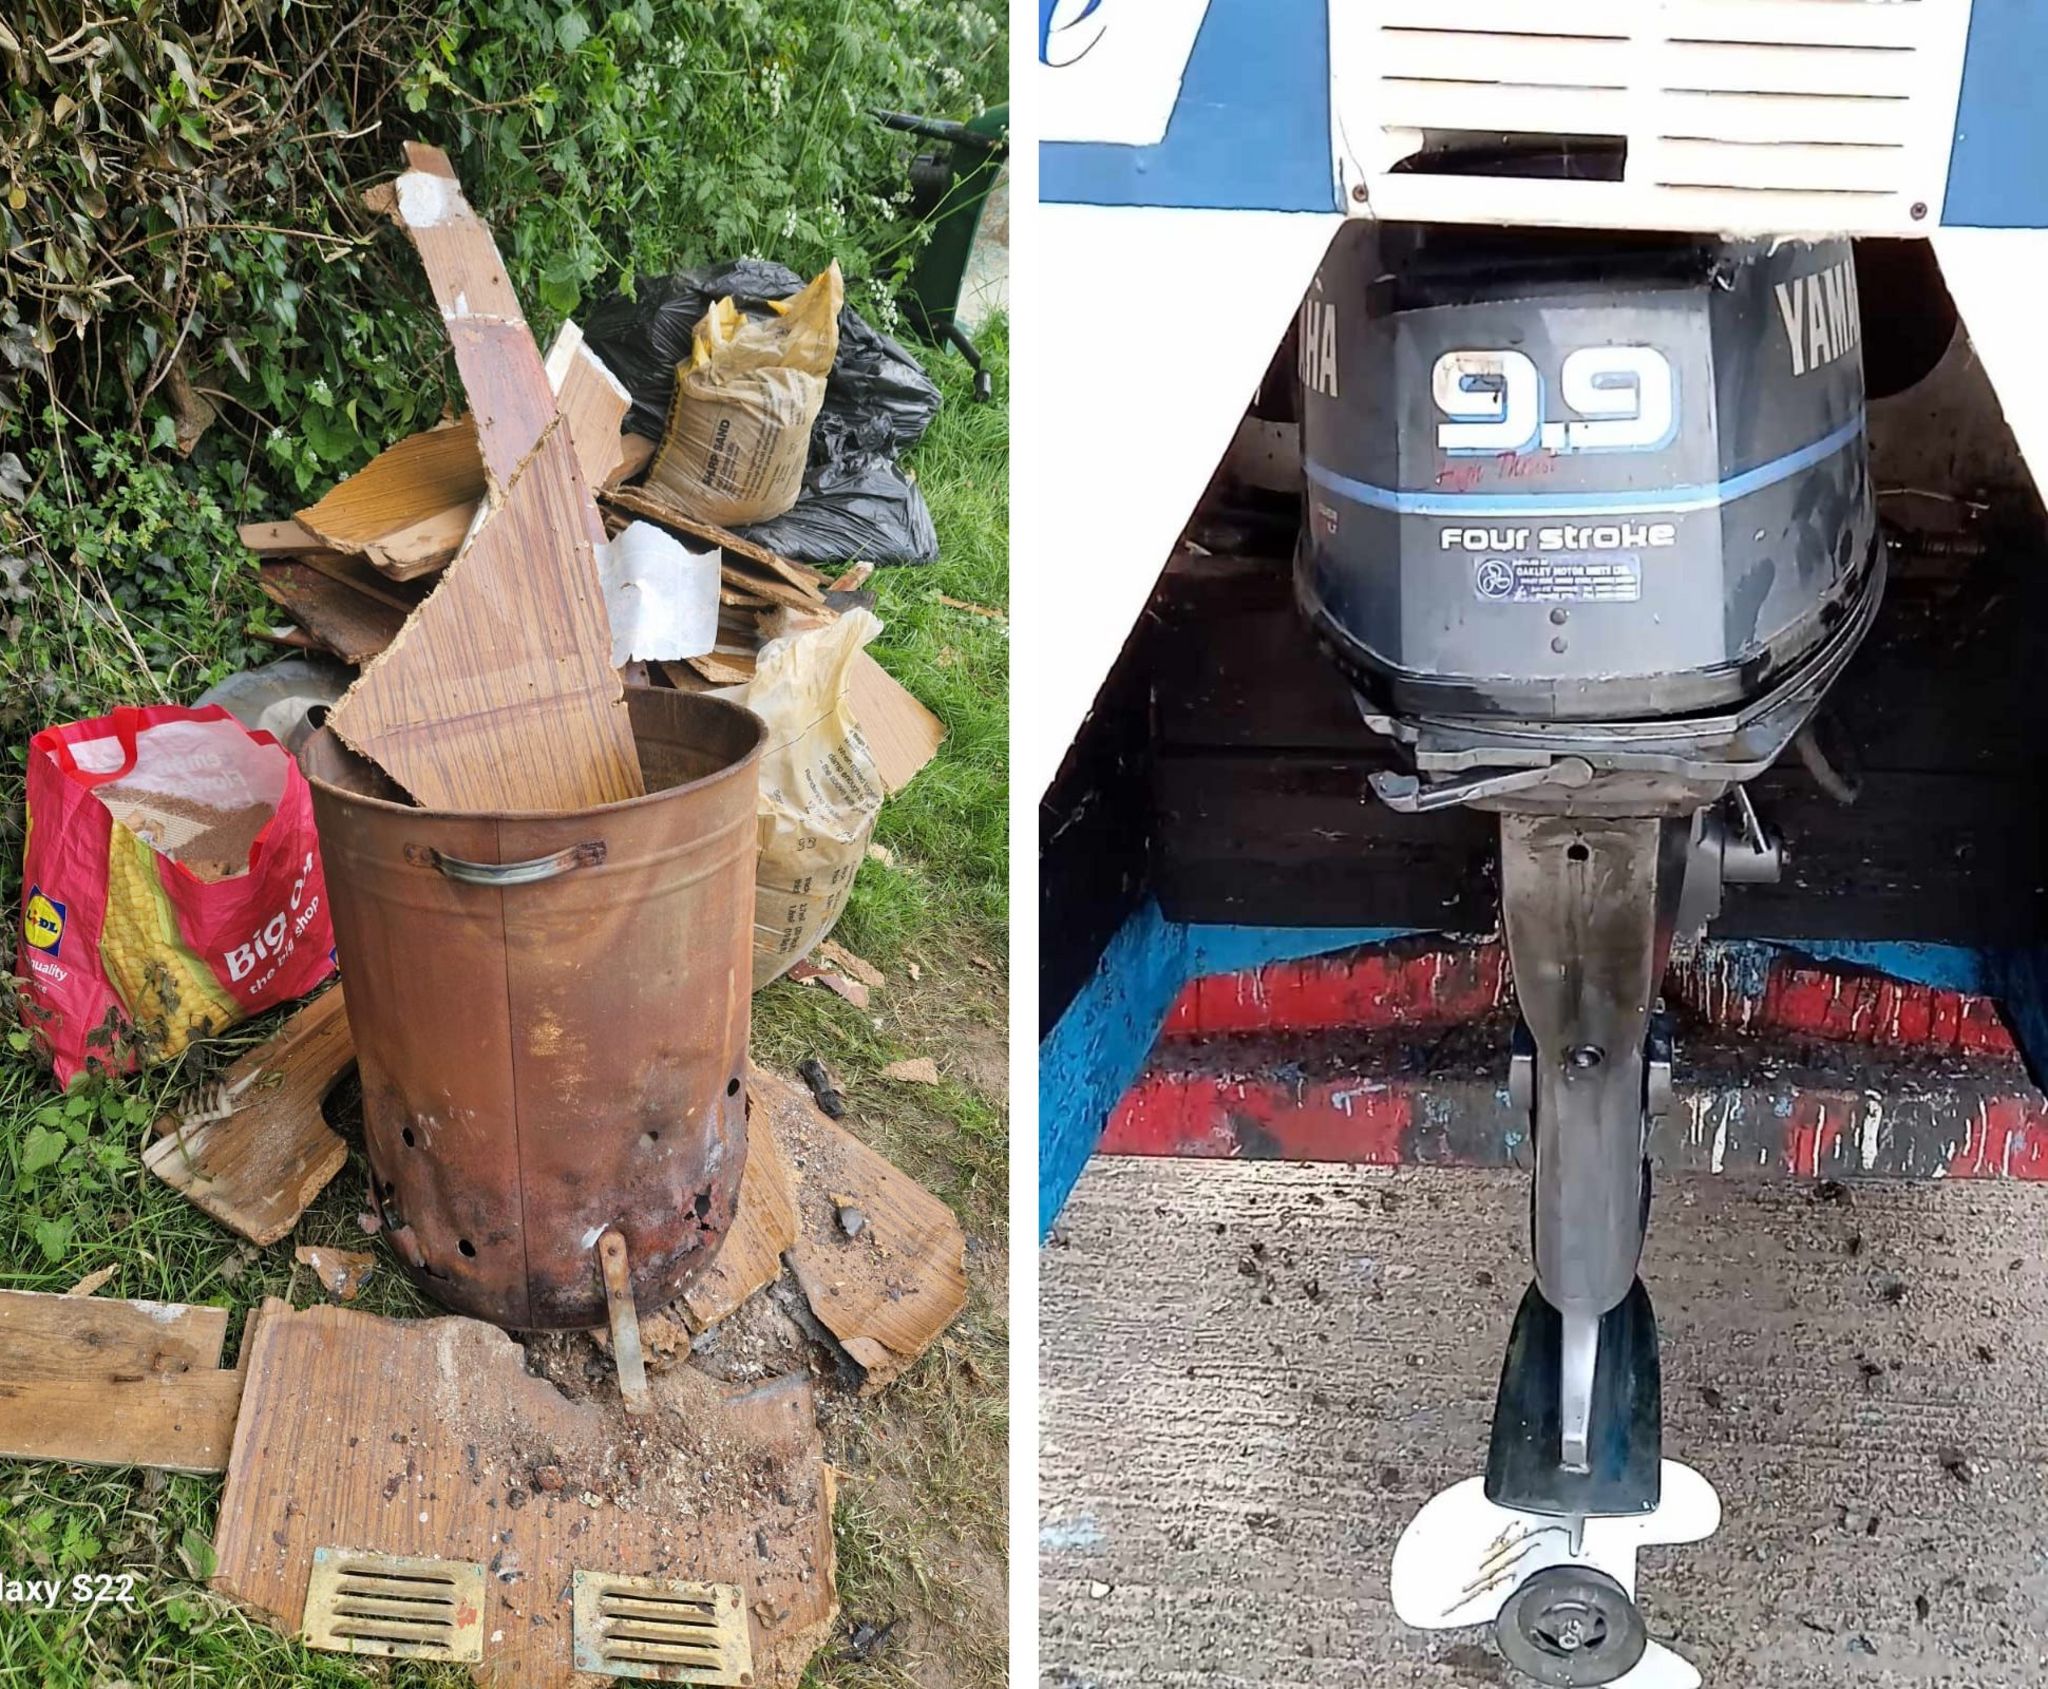 The contents of the boat and the stolen outboard motor